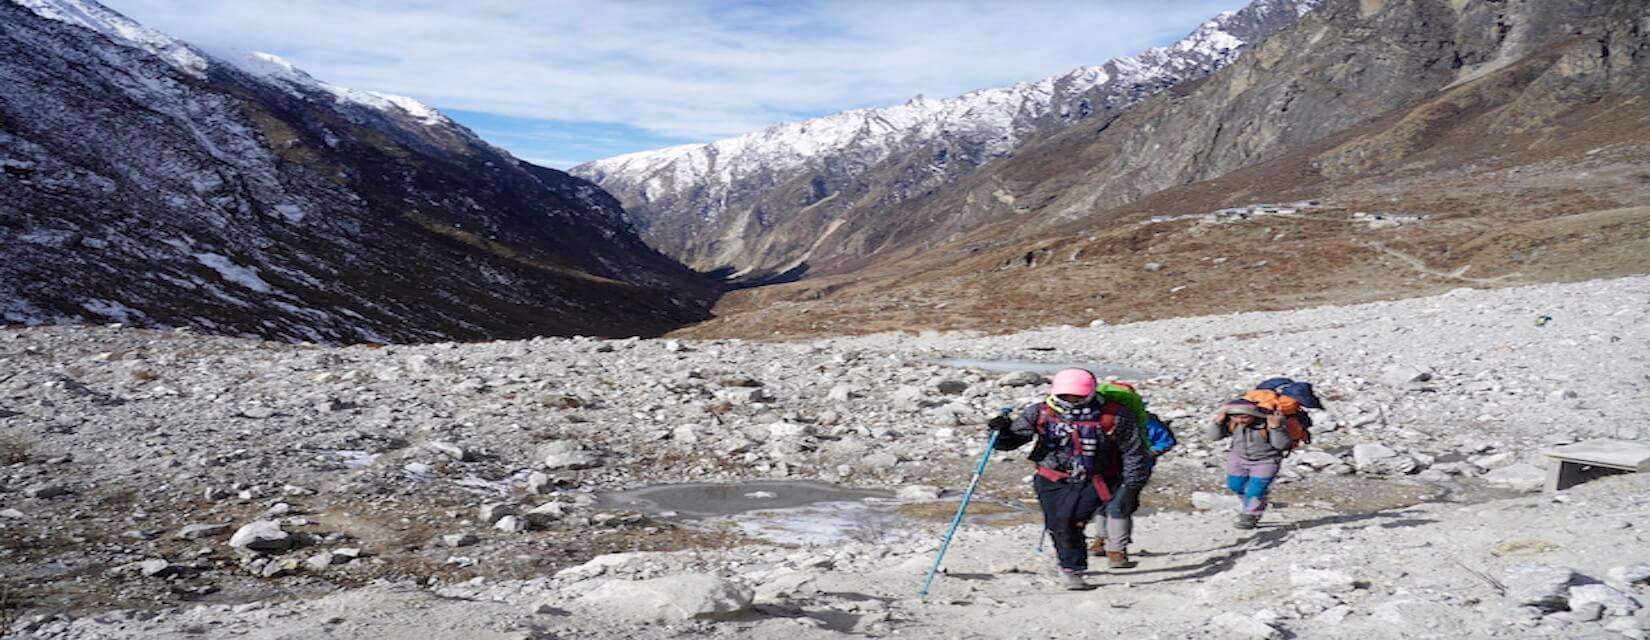 Terms and Conditions - Himalayan frozen adventure